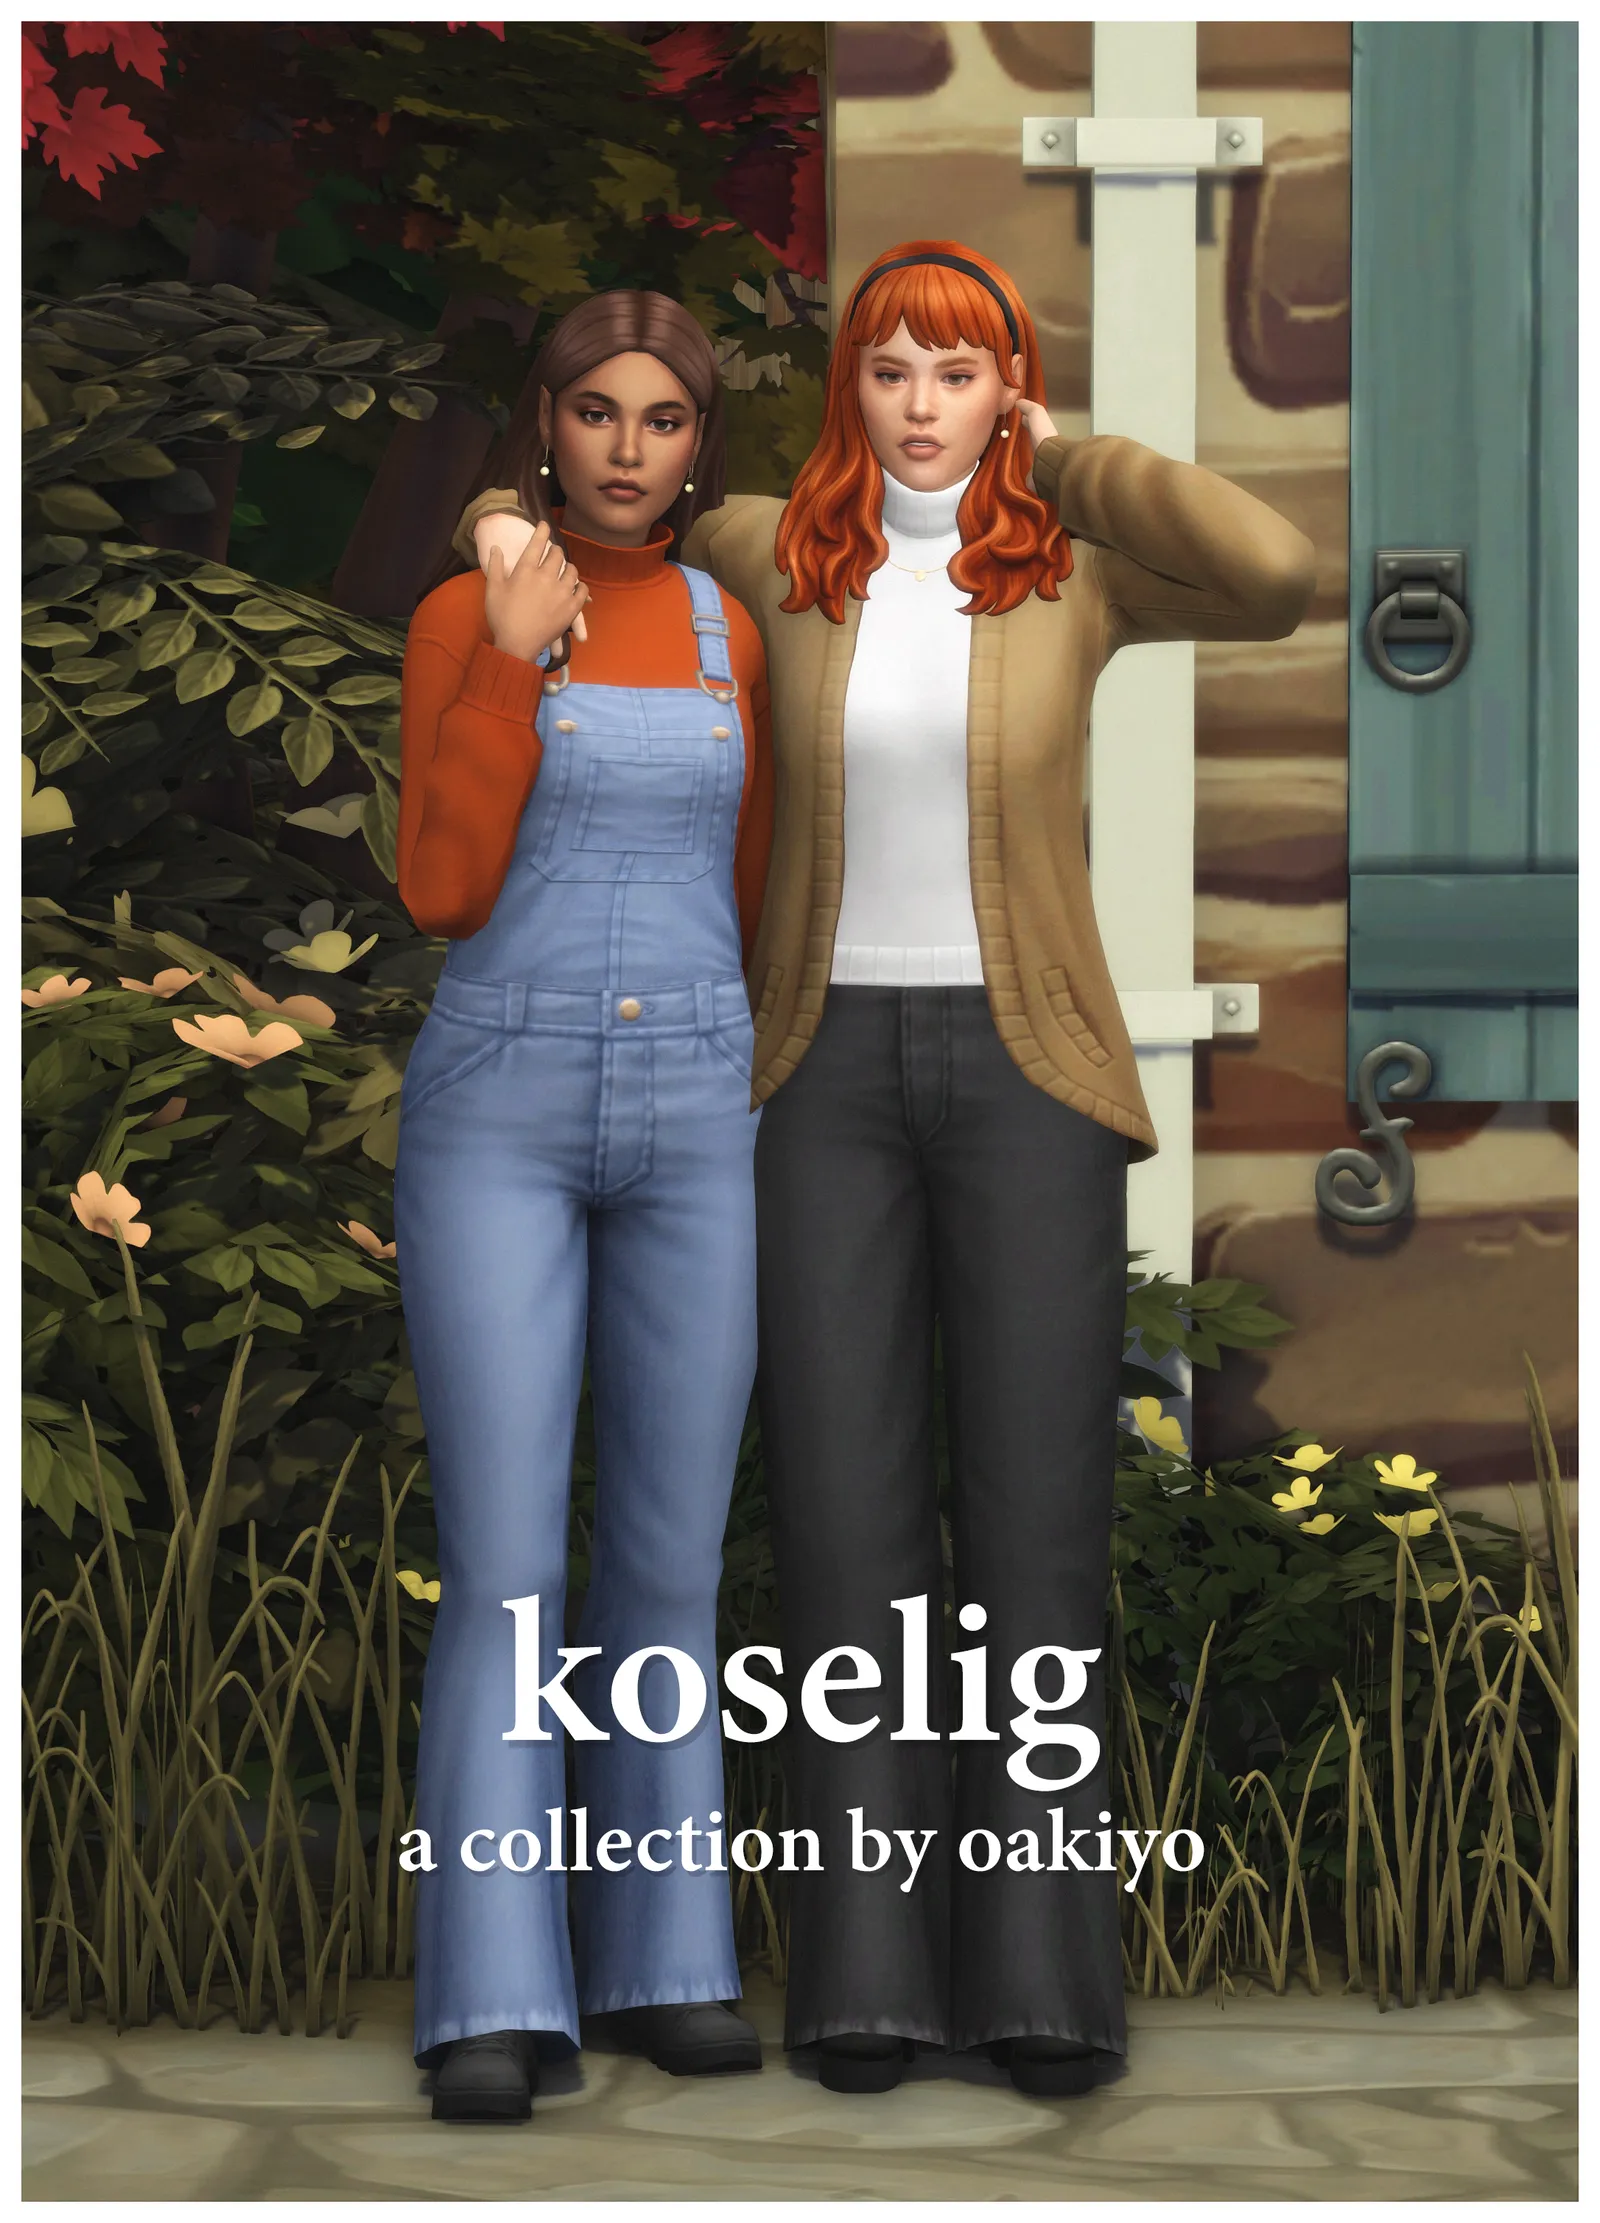 The Koselig Collection